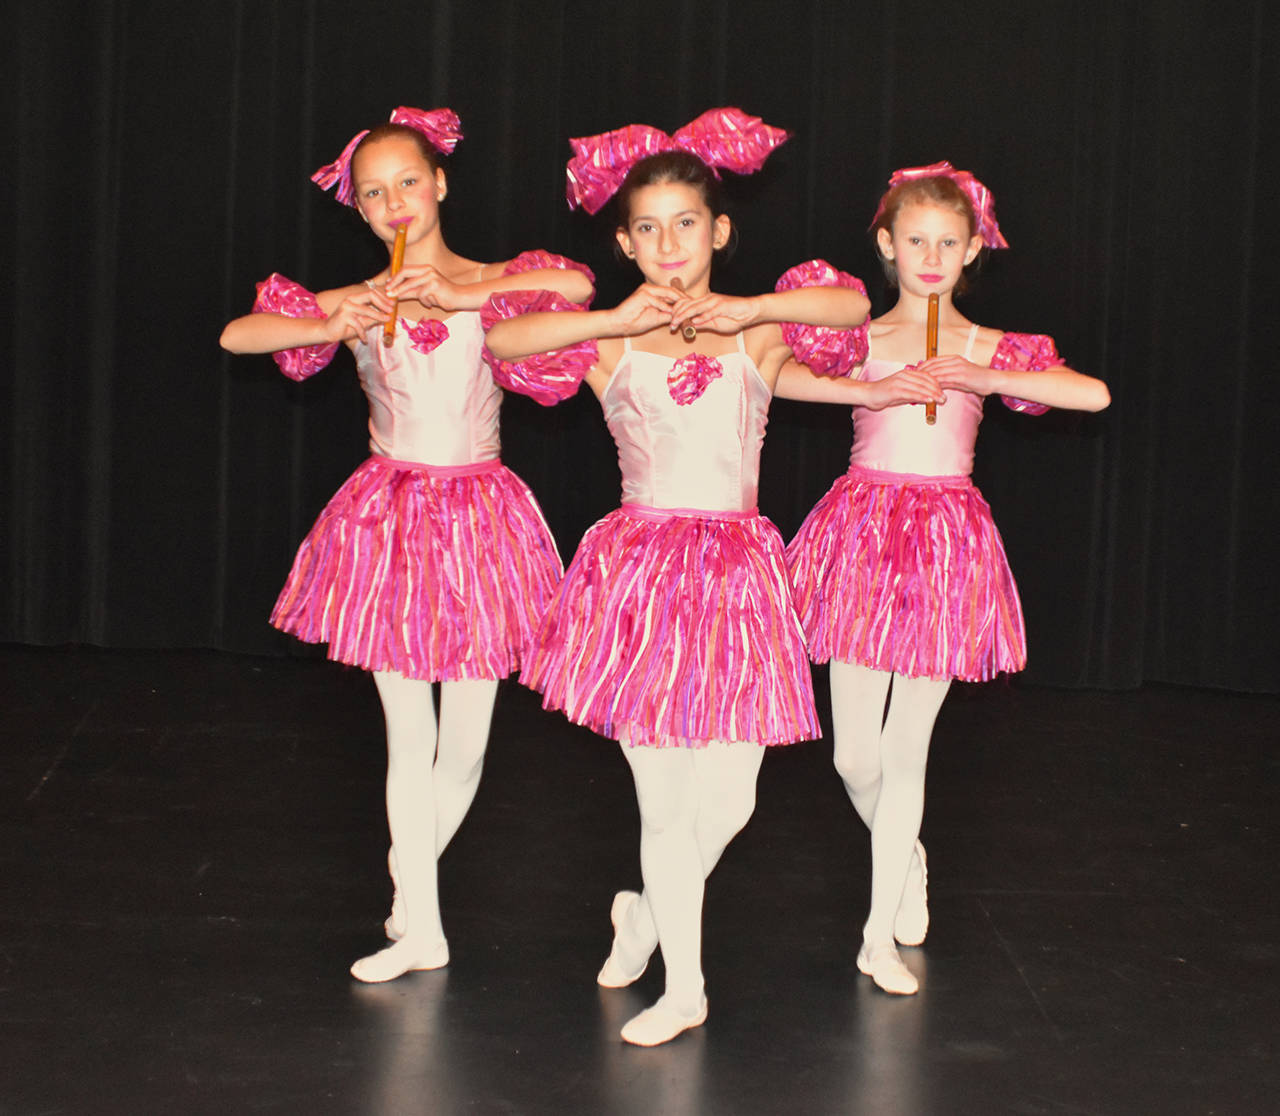 A ballet student showcase, Saturday, March 30